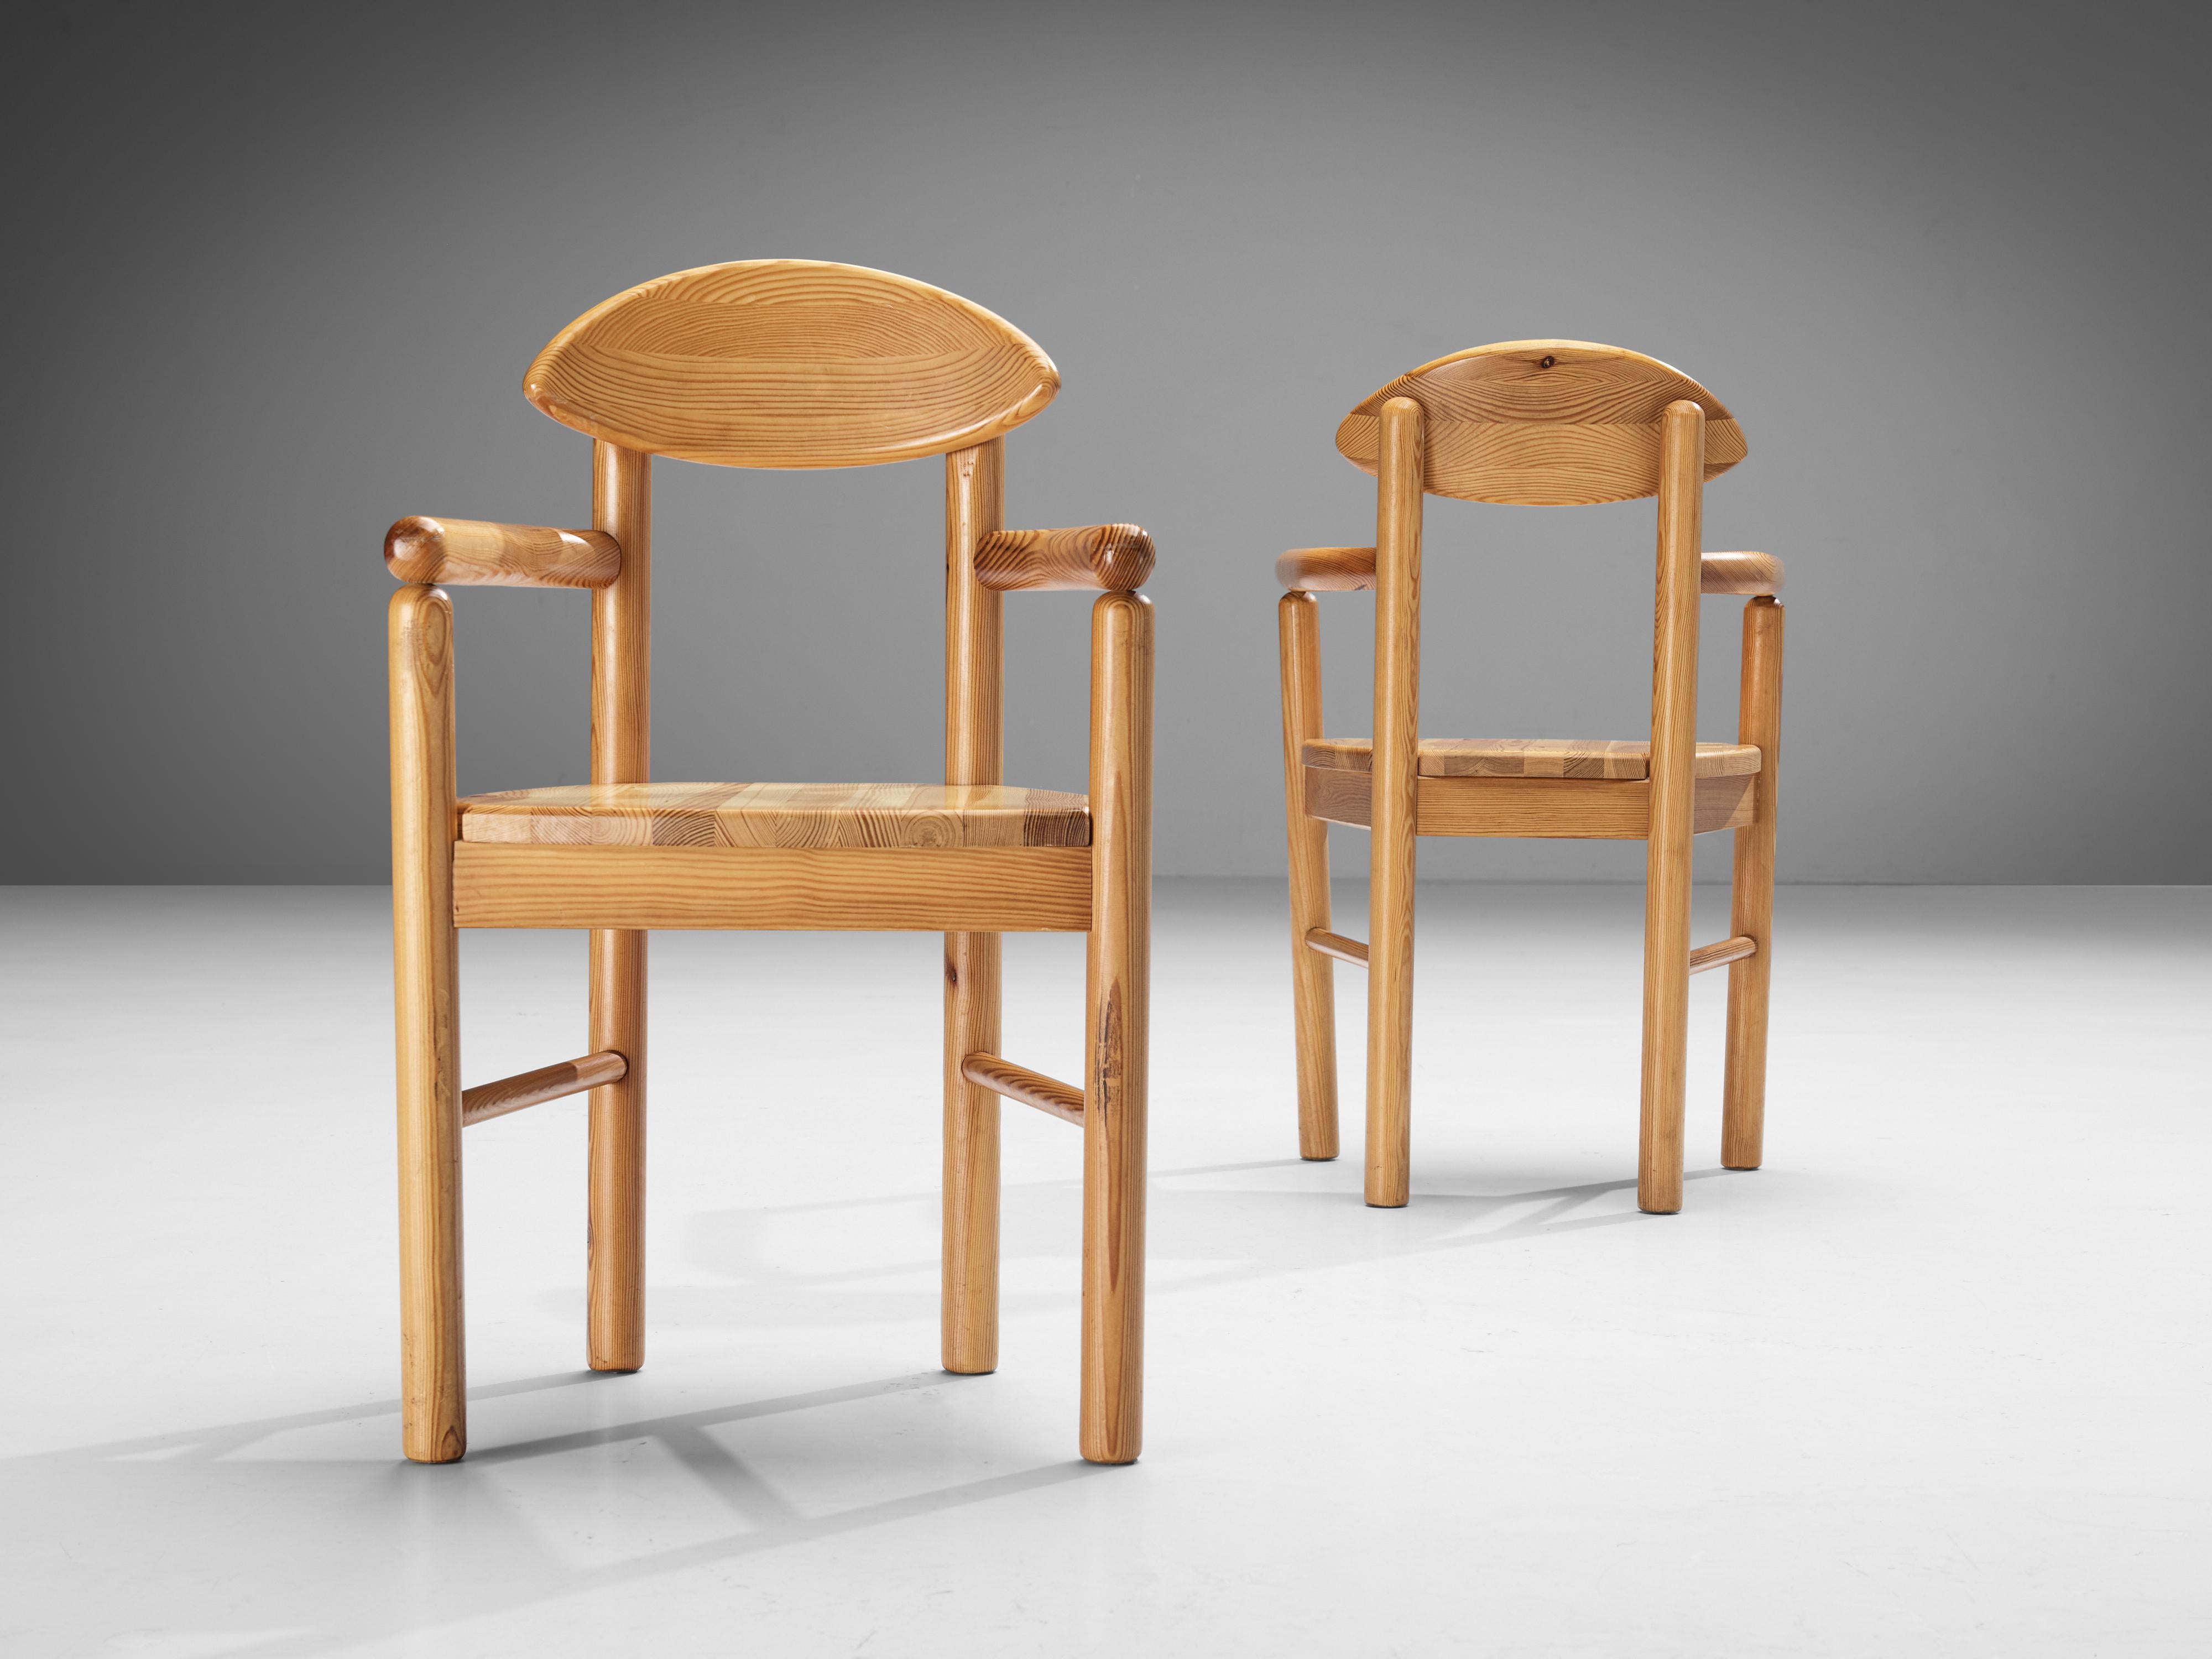 Armchairs or dining chairs, pine, Denmark 1970s. 

Beautiful, organic and natural set of four dining chairs in solid pine. A simplistic design with a round seating and attention for the natural expression and grain of the wood. These armchairs